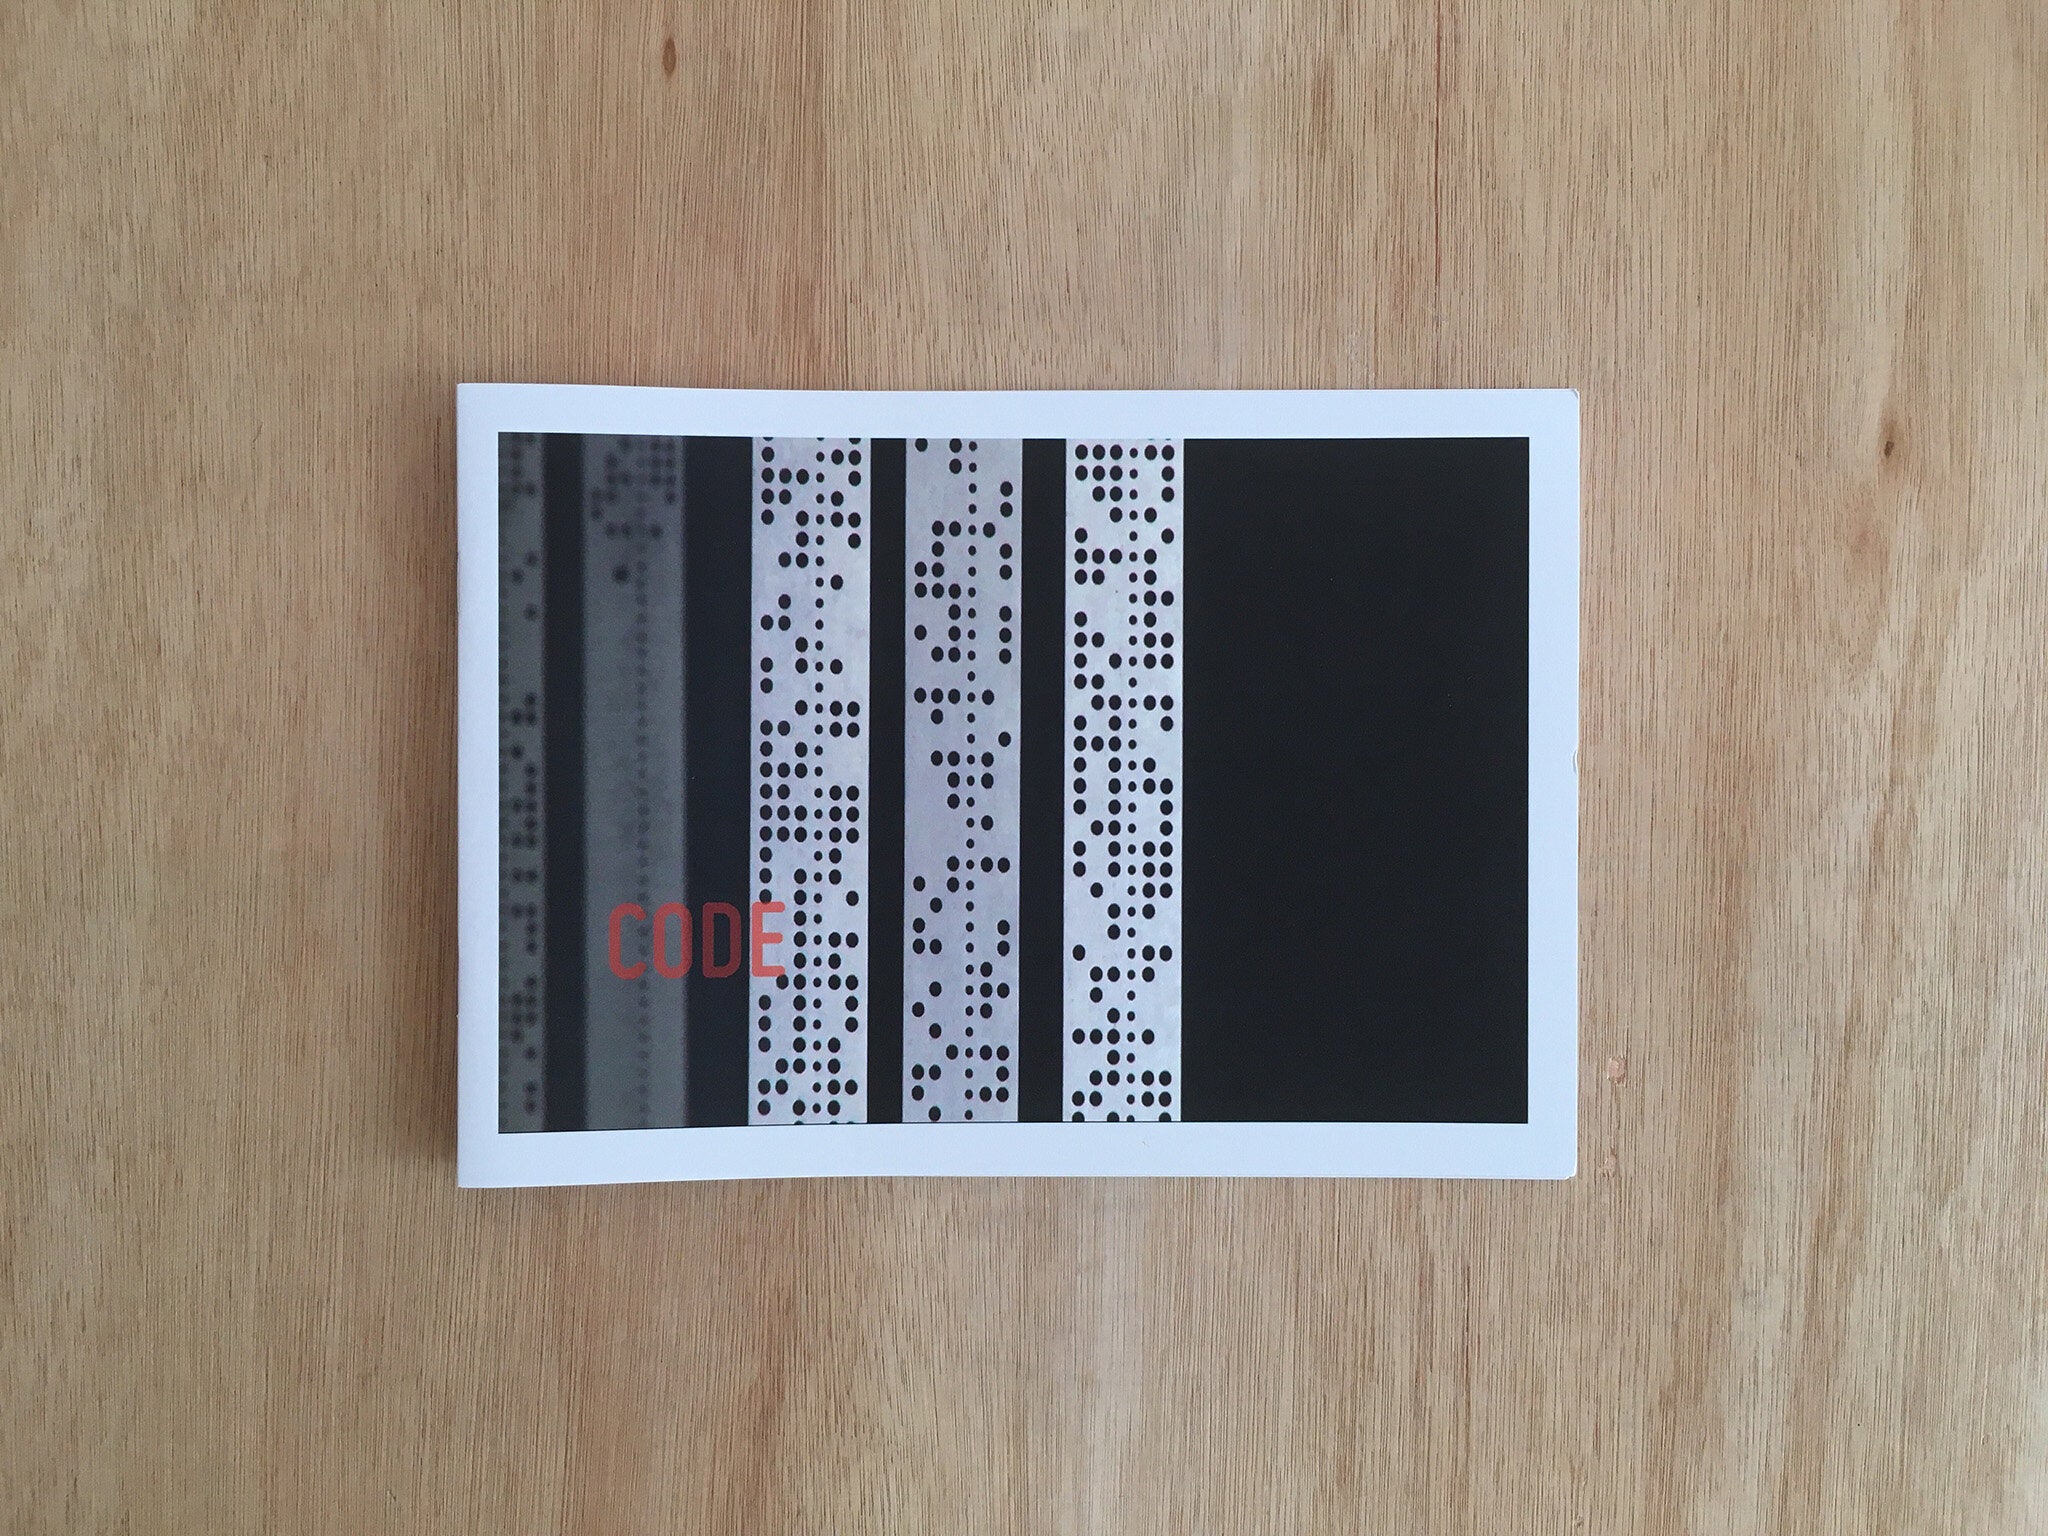 CODE: FORGETTING BLETCHLEY PARK by Gair Dunlop